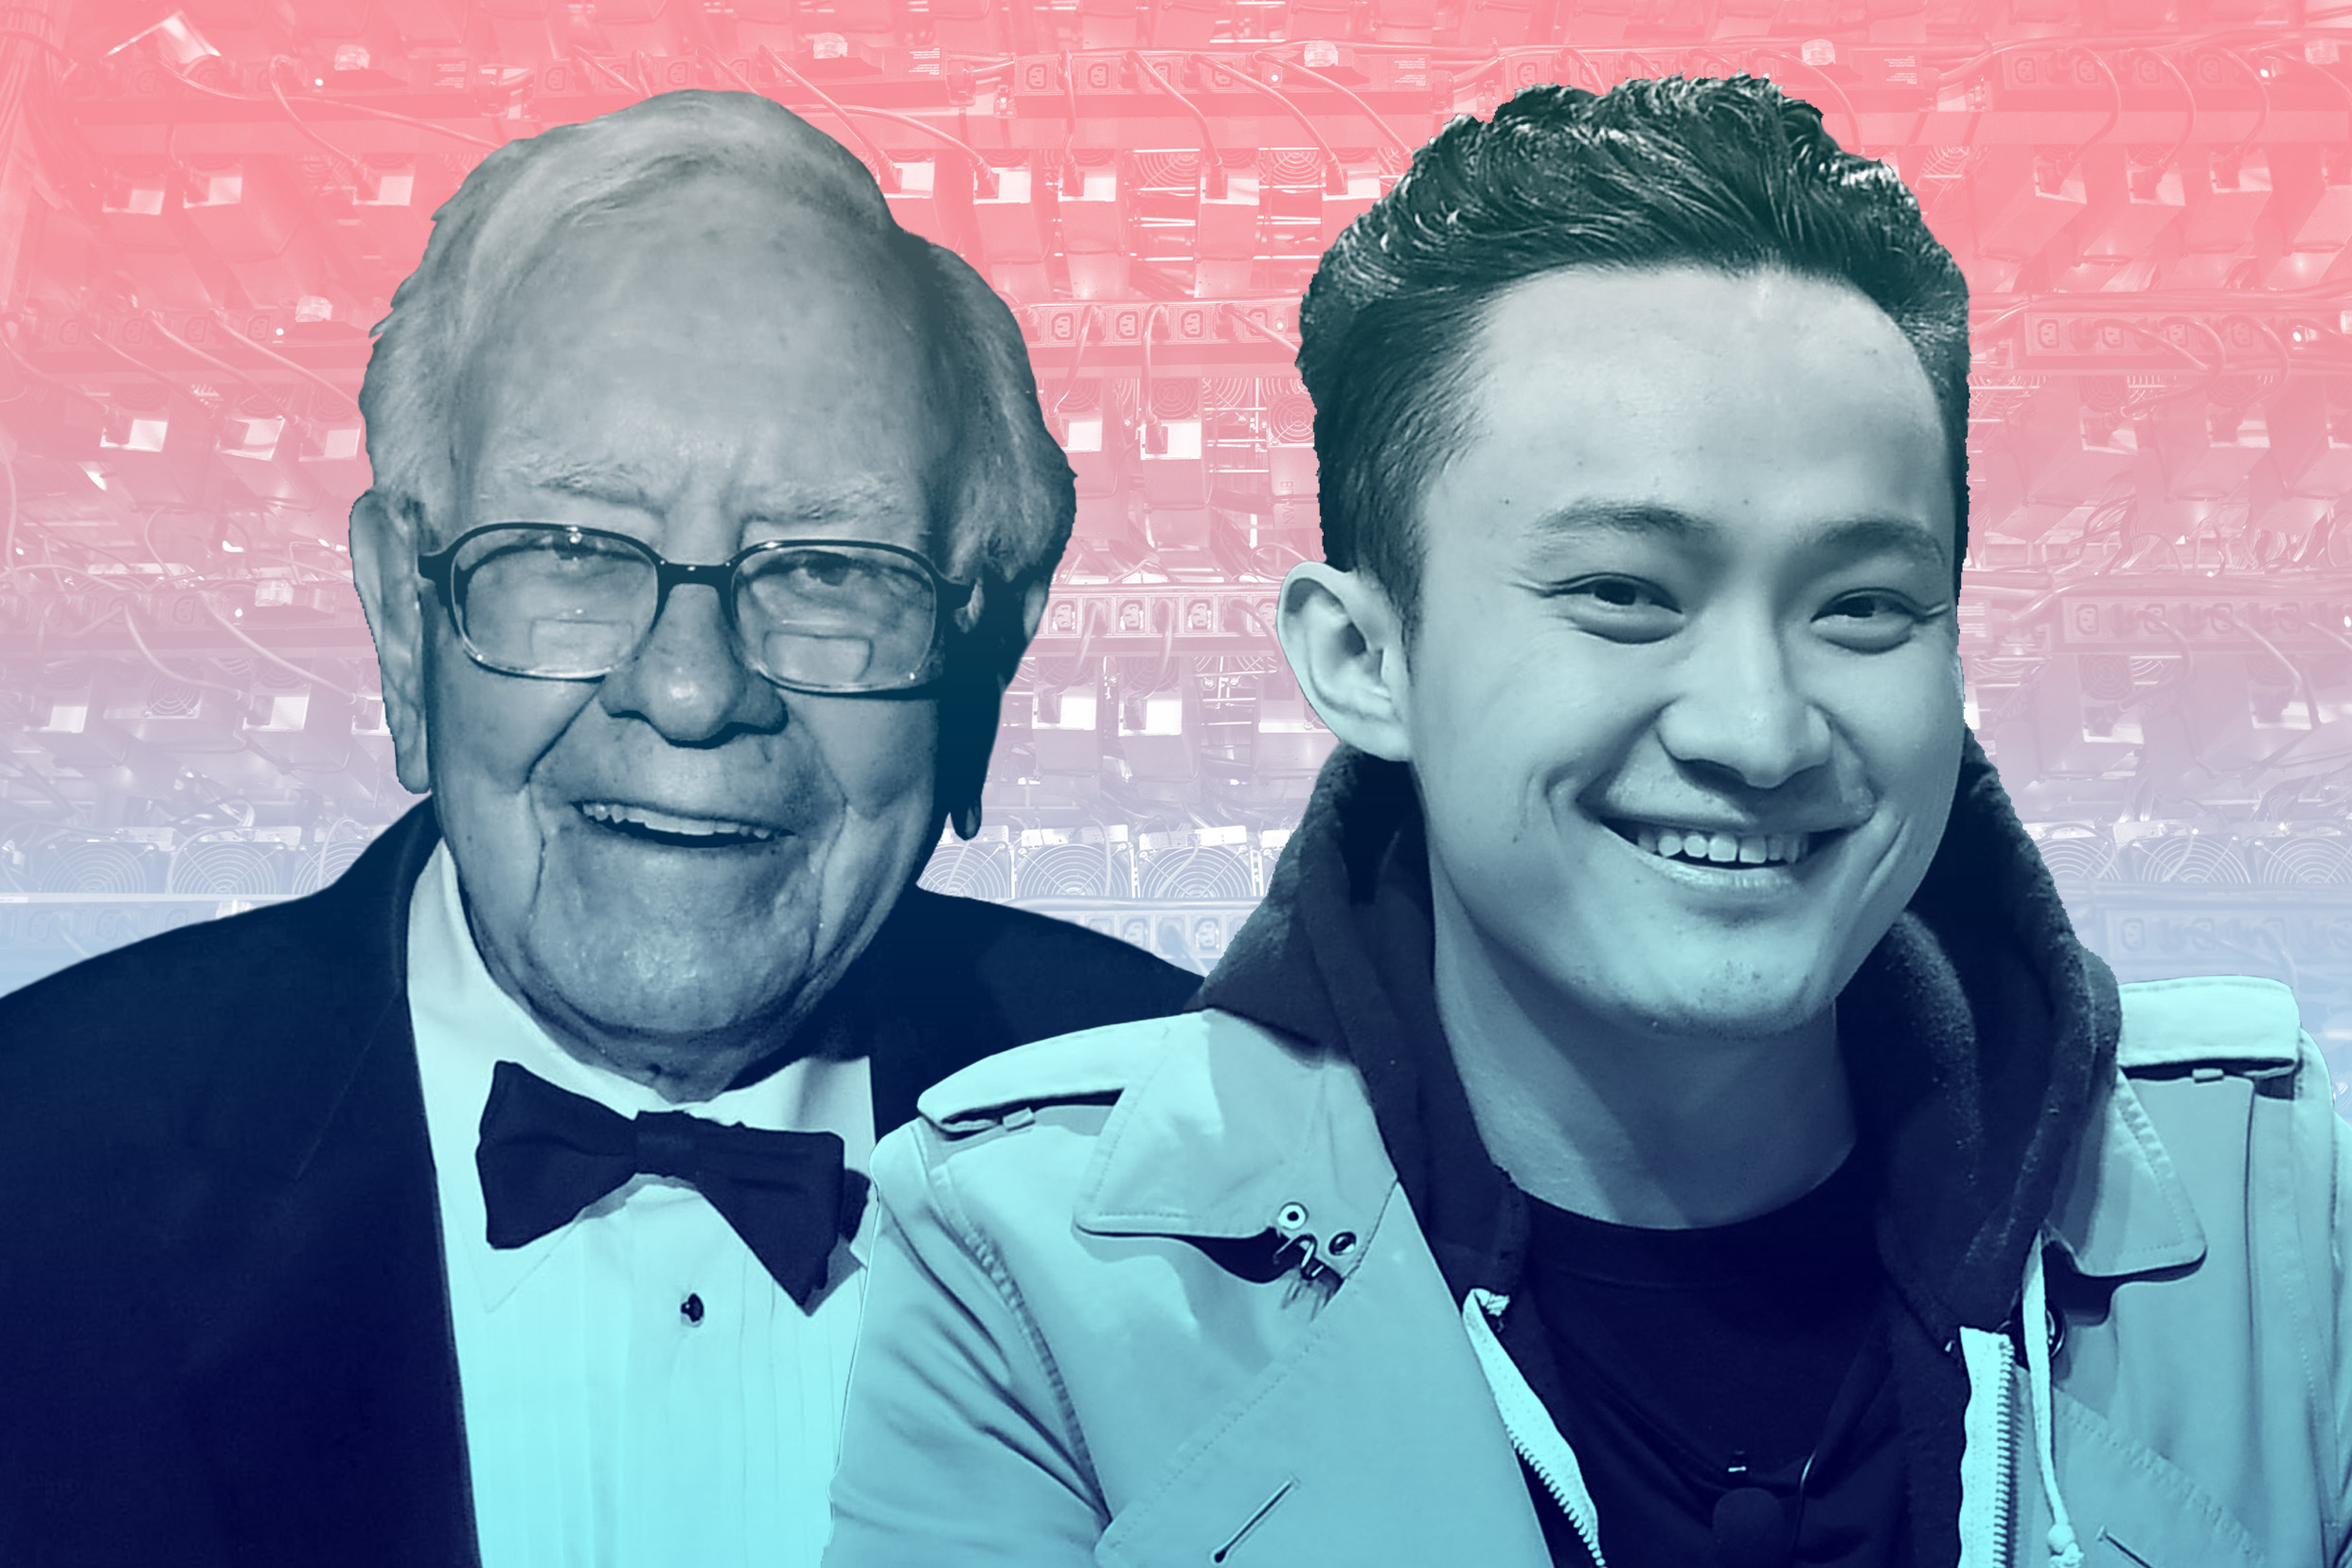 Meet the 28-Year-Old Cryptocurrency Founder Who Just Paid $4.57 Million to Have Lunch With Warren Buffett